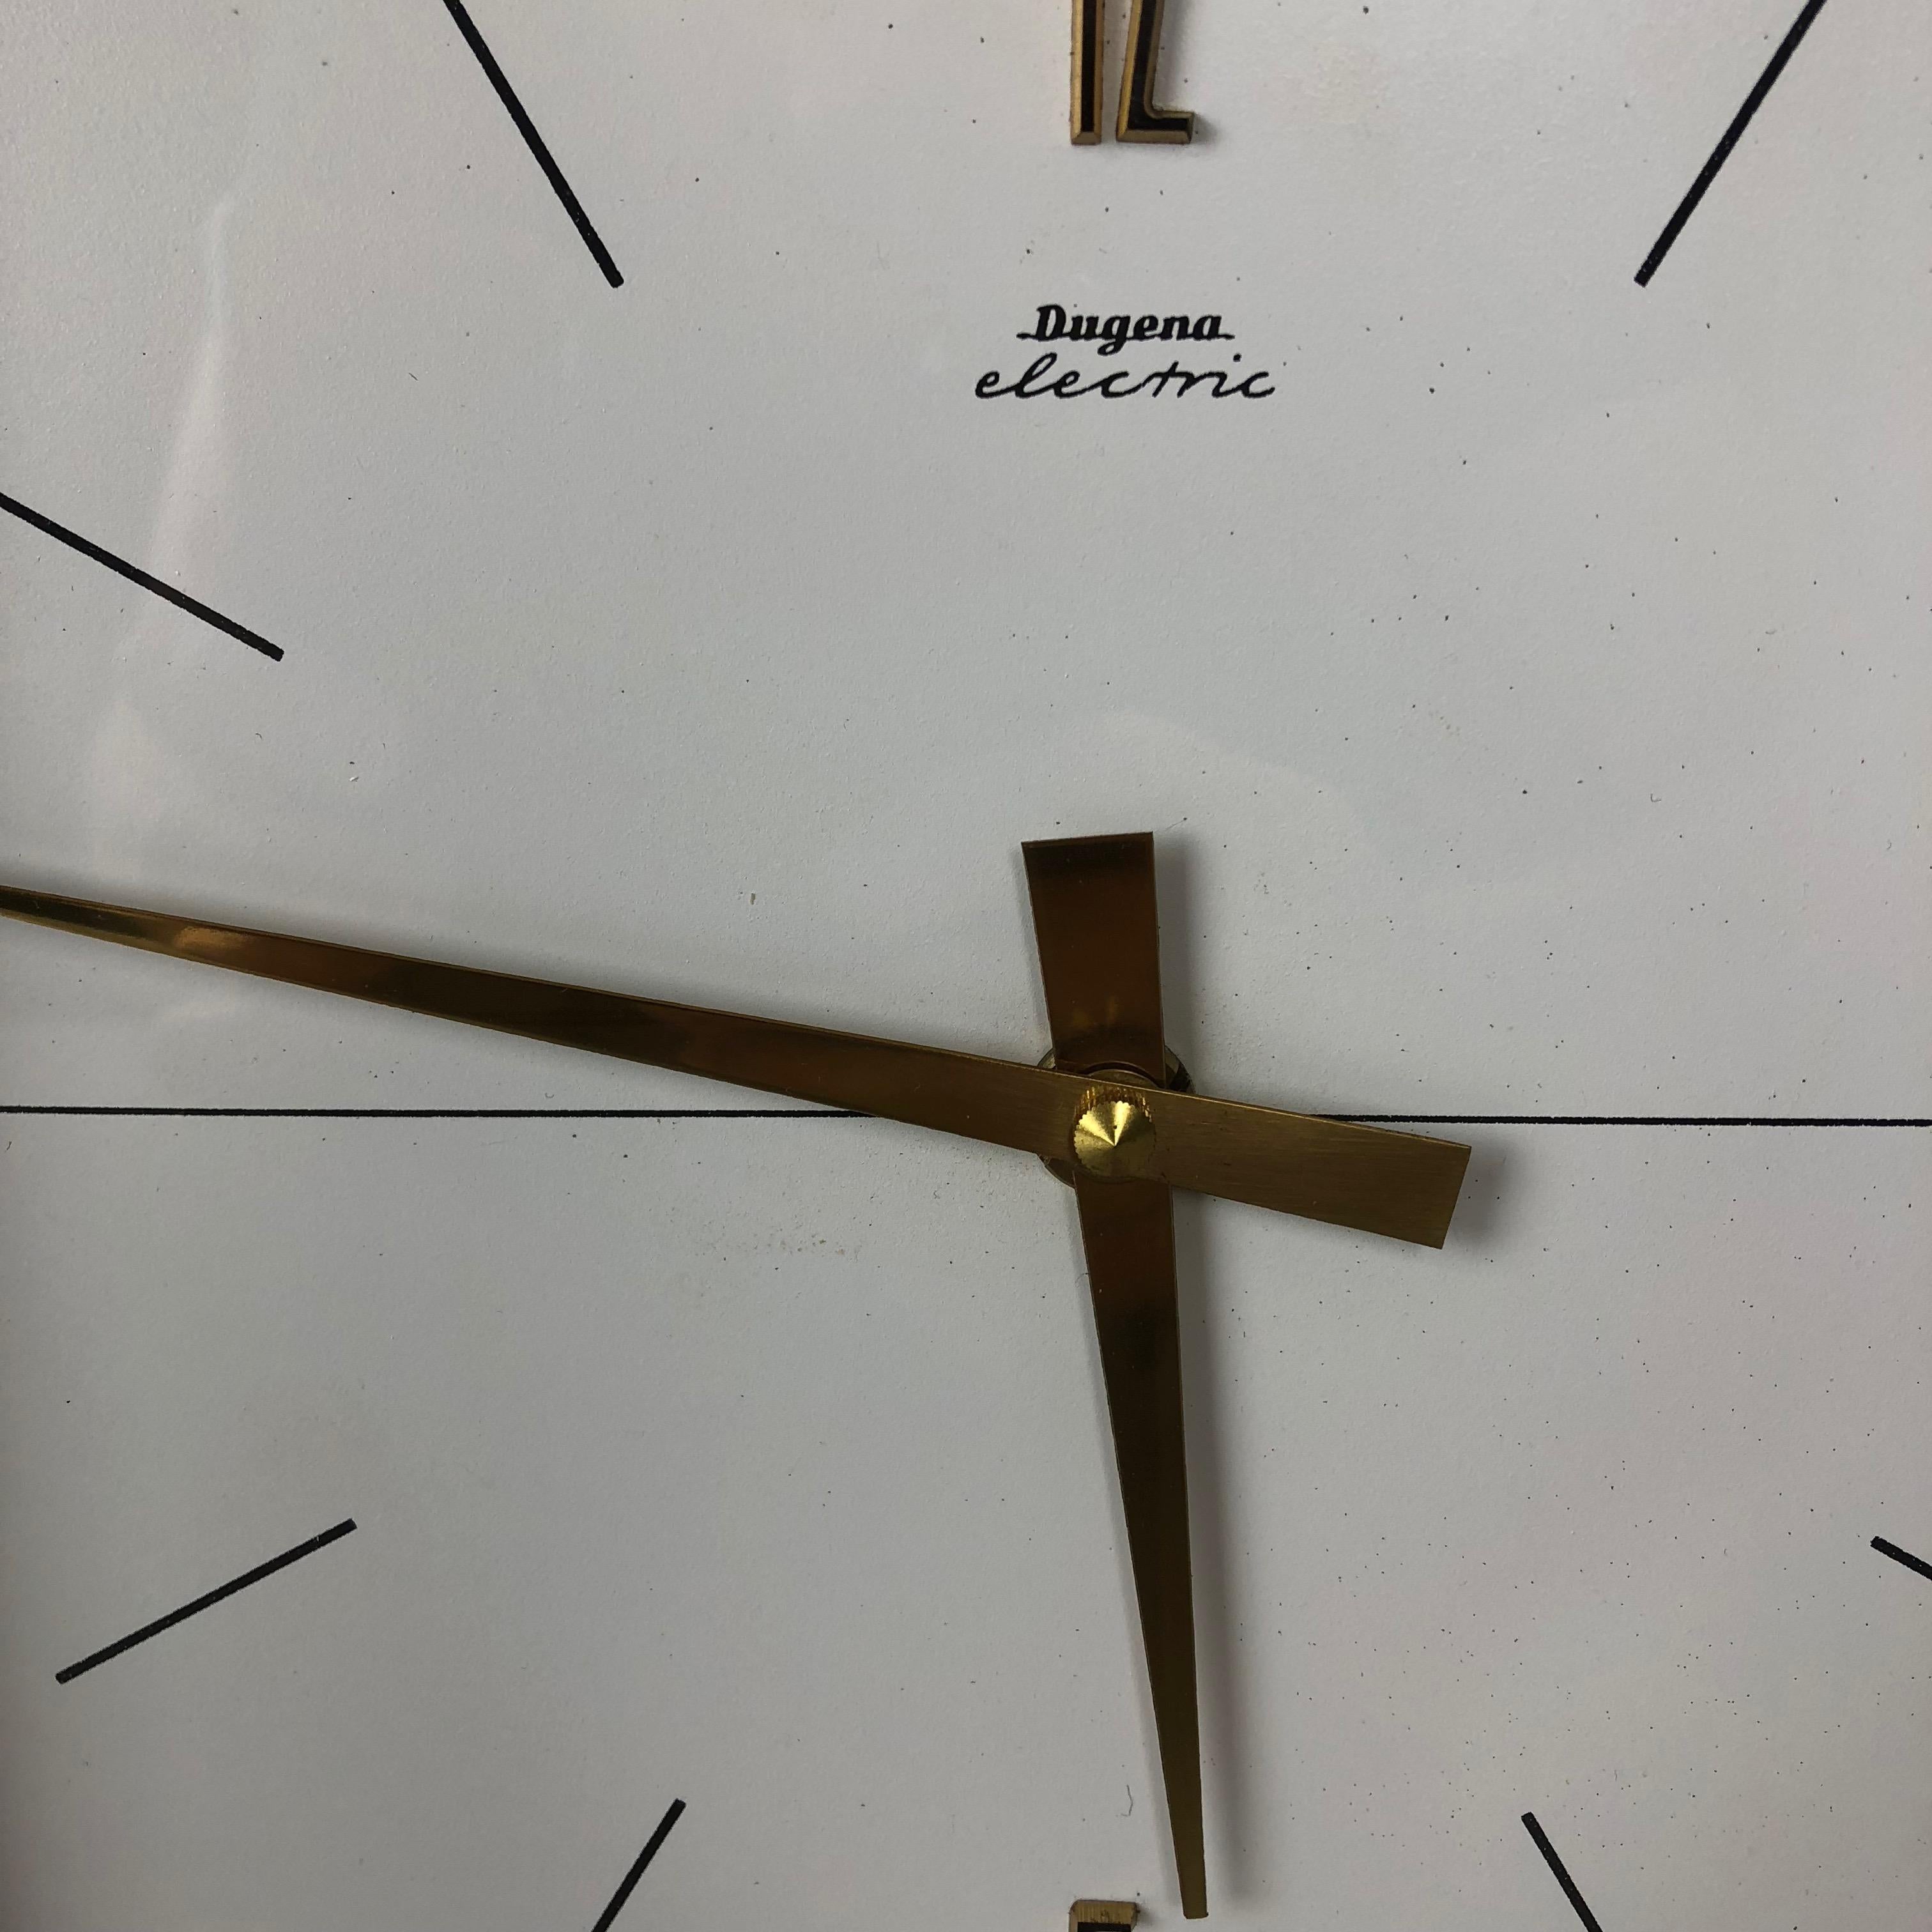 Vintage 1960s Hollywood Regency Brass Wall Table Clock Dugena Electric, Germany 2